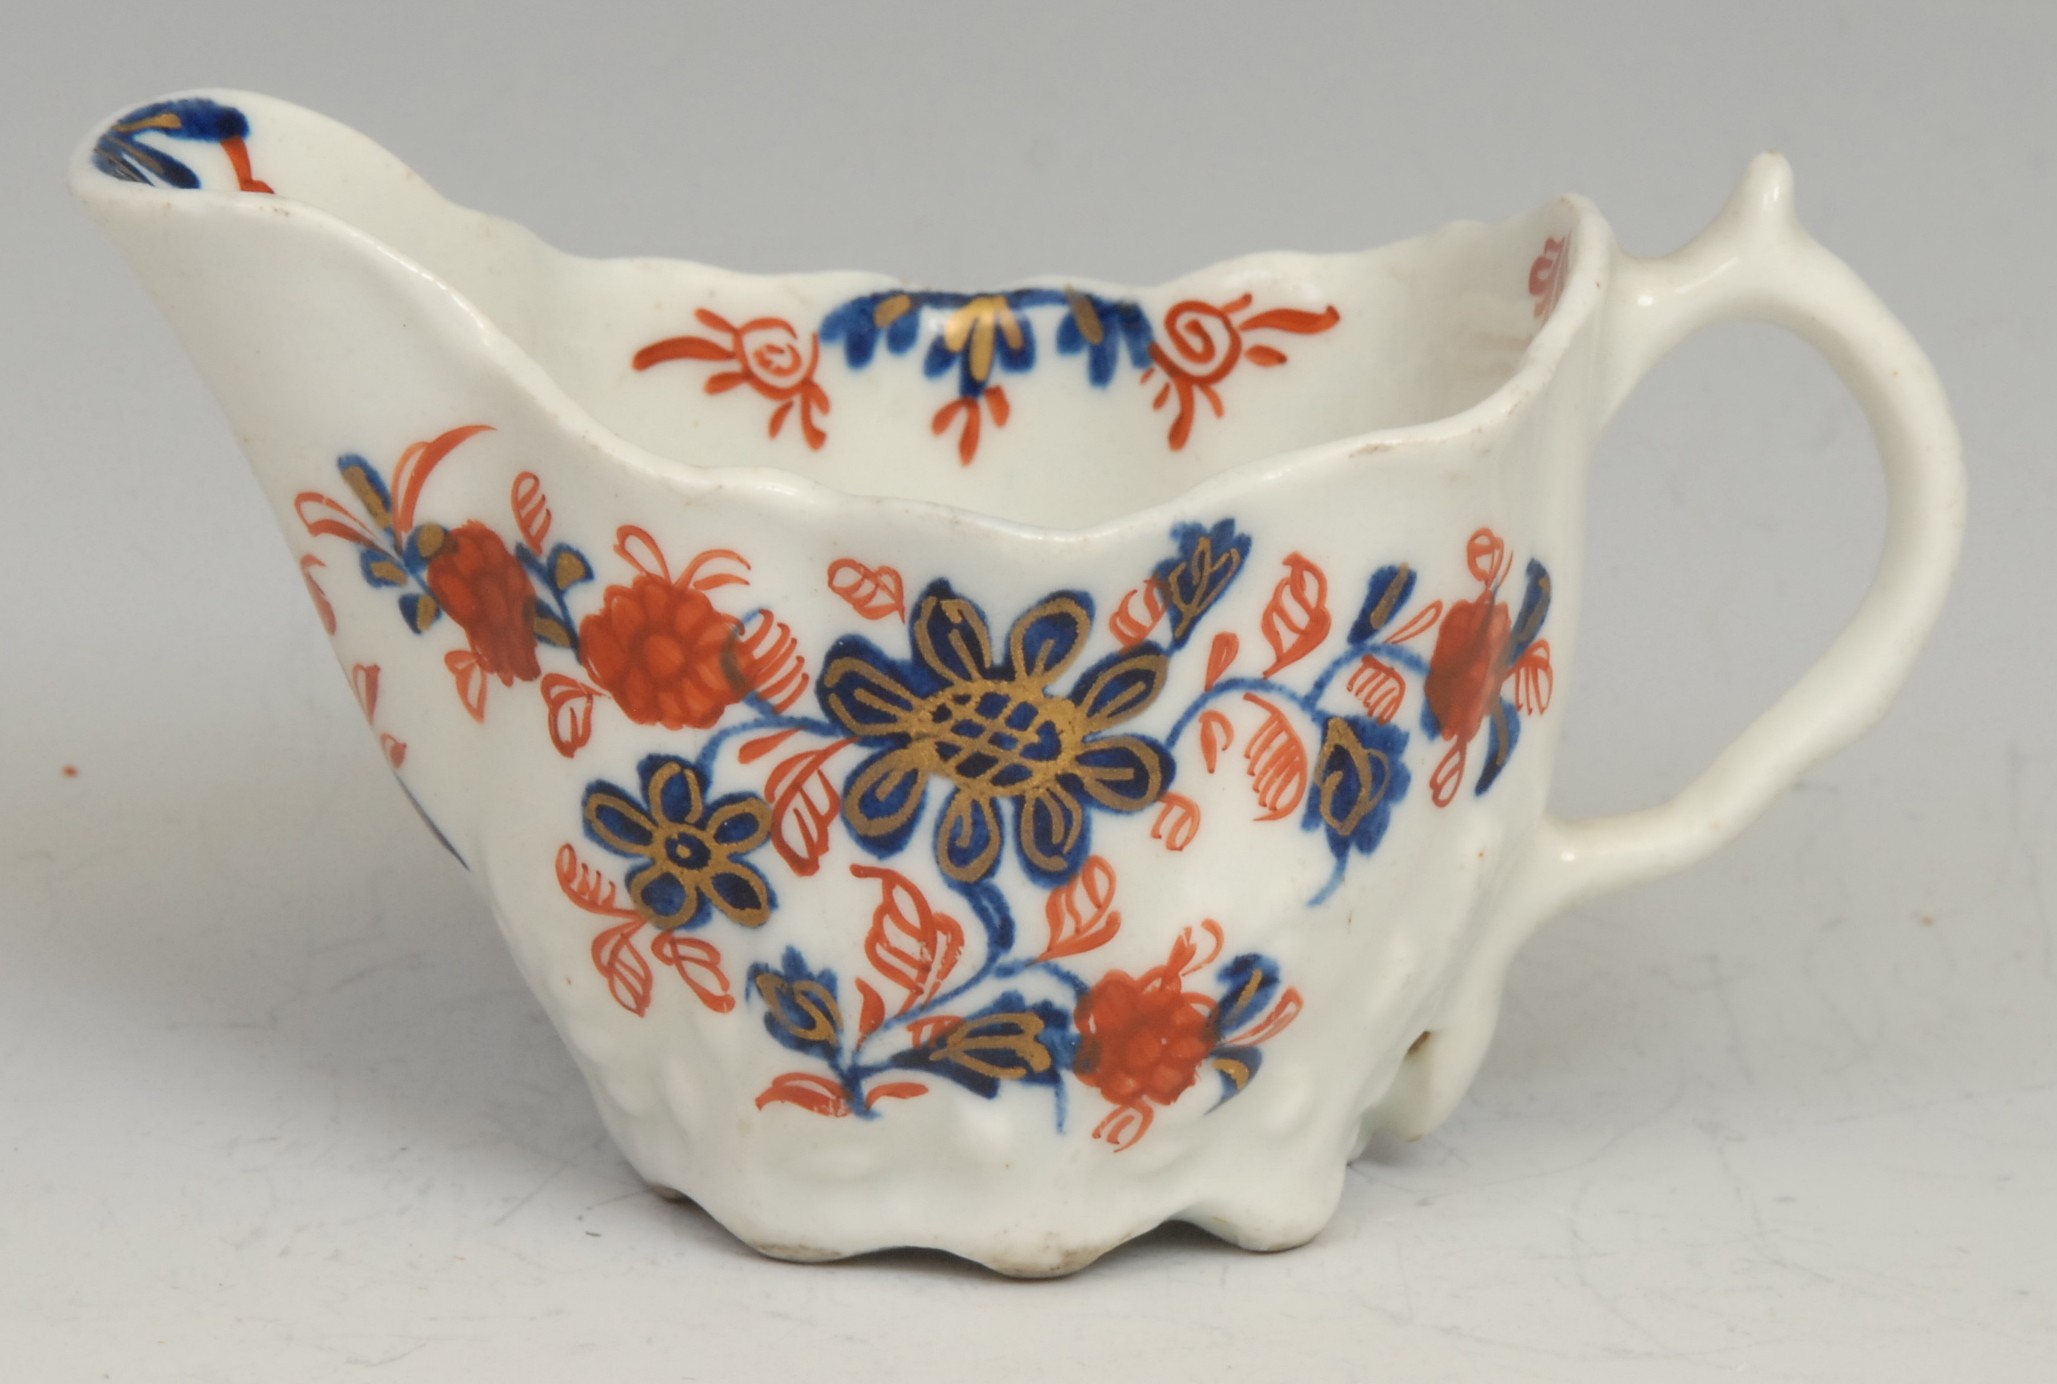 A Lowestoft Low Chelsea ewer, decorated in underglaze blue and overglaze red with flowers and - Image 2 of 3